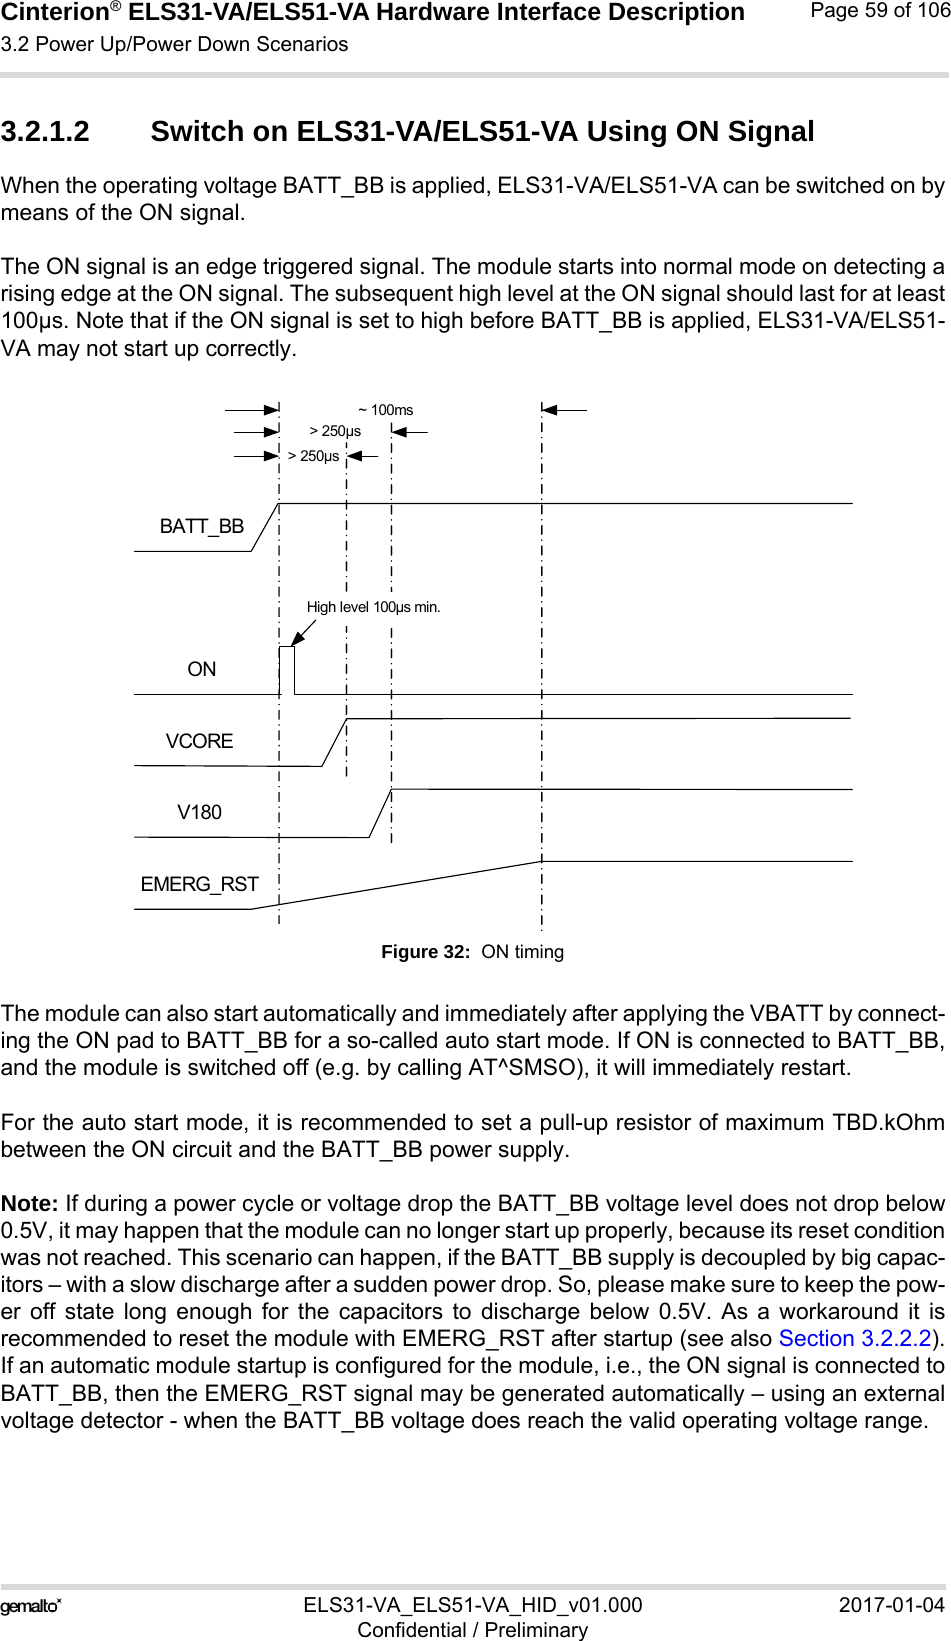 Cinterion® ELS31-VA/ELS51-VA Hardware Interface Description3.2 Power Up/Power Down Scenarios76ELS31-VA_ELS51-VA_HID_v01.000 2017-01-04Confidential / PreliminaryPage 59 of 1063.2.1.2 Switch on ELS31-VA/ELS51-VA Using ON SignalWhen the operating voltage BATT_BB is applied, ELS31-VA/ELS51-VA can be switched on bymeans of the ON signal. The ON signal is an edge triggered signal. The module starts into normal mode on detecting arising edge at the ON signal. The subsequent high level at the ON signal should last for at least100µs. Note that if the ON signal is set to high before BATT_BB is applied, ELS31-VA/ELS51-VA may not start up correctly.Figure 32:  ON timingThe module can also start automatically and immediately after applying the VBATT by connect-ing the ON pad to BATT_BB for a so-called auto start mode. If ON is connected to BATT_BB,and the module is switched off (e.g. by calling AT^SMSO), it will immediately restart.For the auto start mode, it is recommended to set a pull-up resistor of maximum TBD.kOhmbetween the ON circuit and the BATT_BB power supply. Note: If during a power cycle or voltage drop the BATT_BB voltage level does not drop below0.5V, it may happen that the module can no longer start up properly, because its reset conditionwas not reached. This scenario can happen, if the BATT_BB supply is decoupled by big capac-itors – with a slow discharge after a sudden power drop. So, please make sure to keep the pow-er off state long enough for the capacitors to discharge below 0.5V. As a workaround it isrecommended to reset the module with EMERG_RST after startup (see also Section 3.2.2.2).If an automatic module startup is configured for the module, i.e., the ON signal is connected toBATT_BB, then the EMERG_RST signal may be generated automatically – using an externalvoltage detector - when the BATT_BB voltage does reach the valid operating voltage range.BATT_BBONV180VCORE&gt; 250µs&gt; 250µsEMERG_RSTHigh level 100µs min.~ 100ms